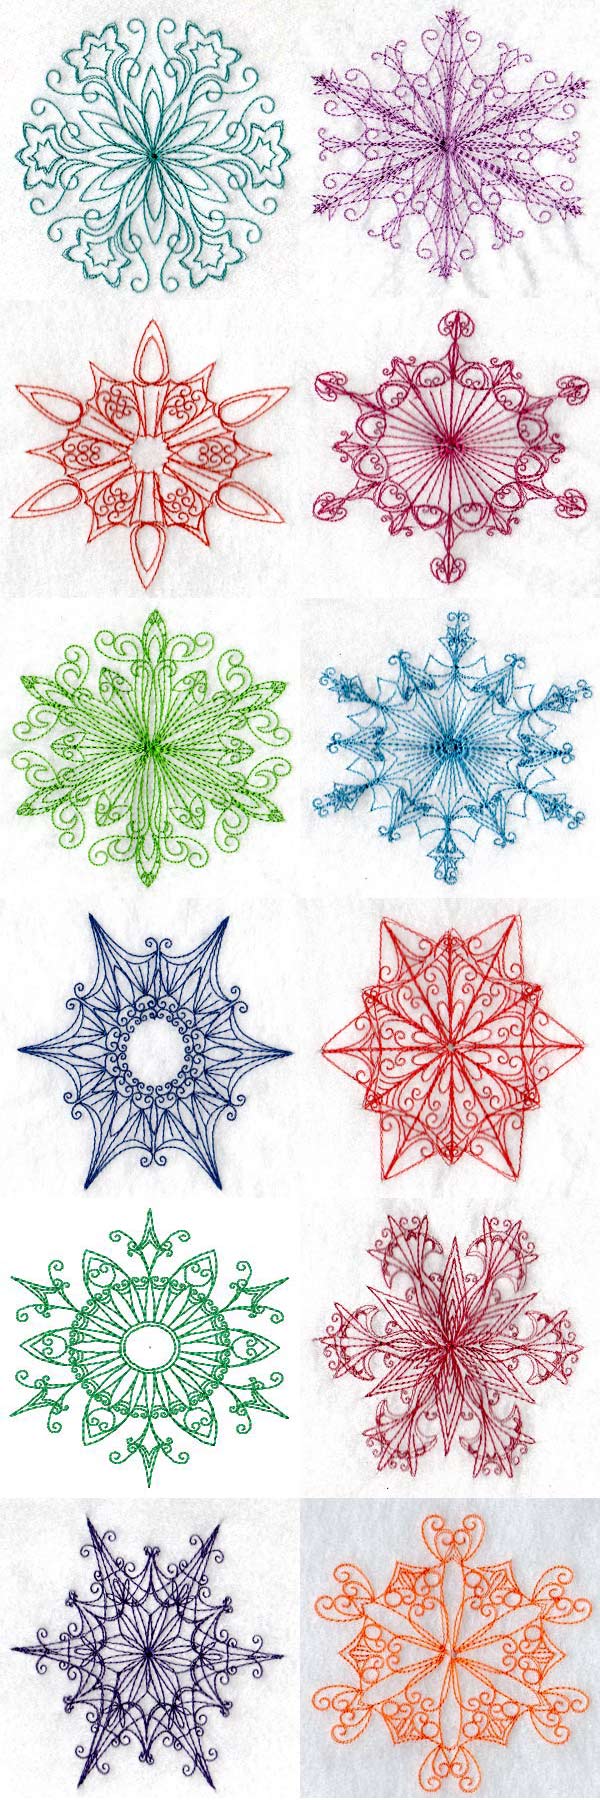 Snowflakes or Stars Embroidery Machine Design Details